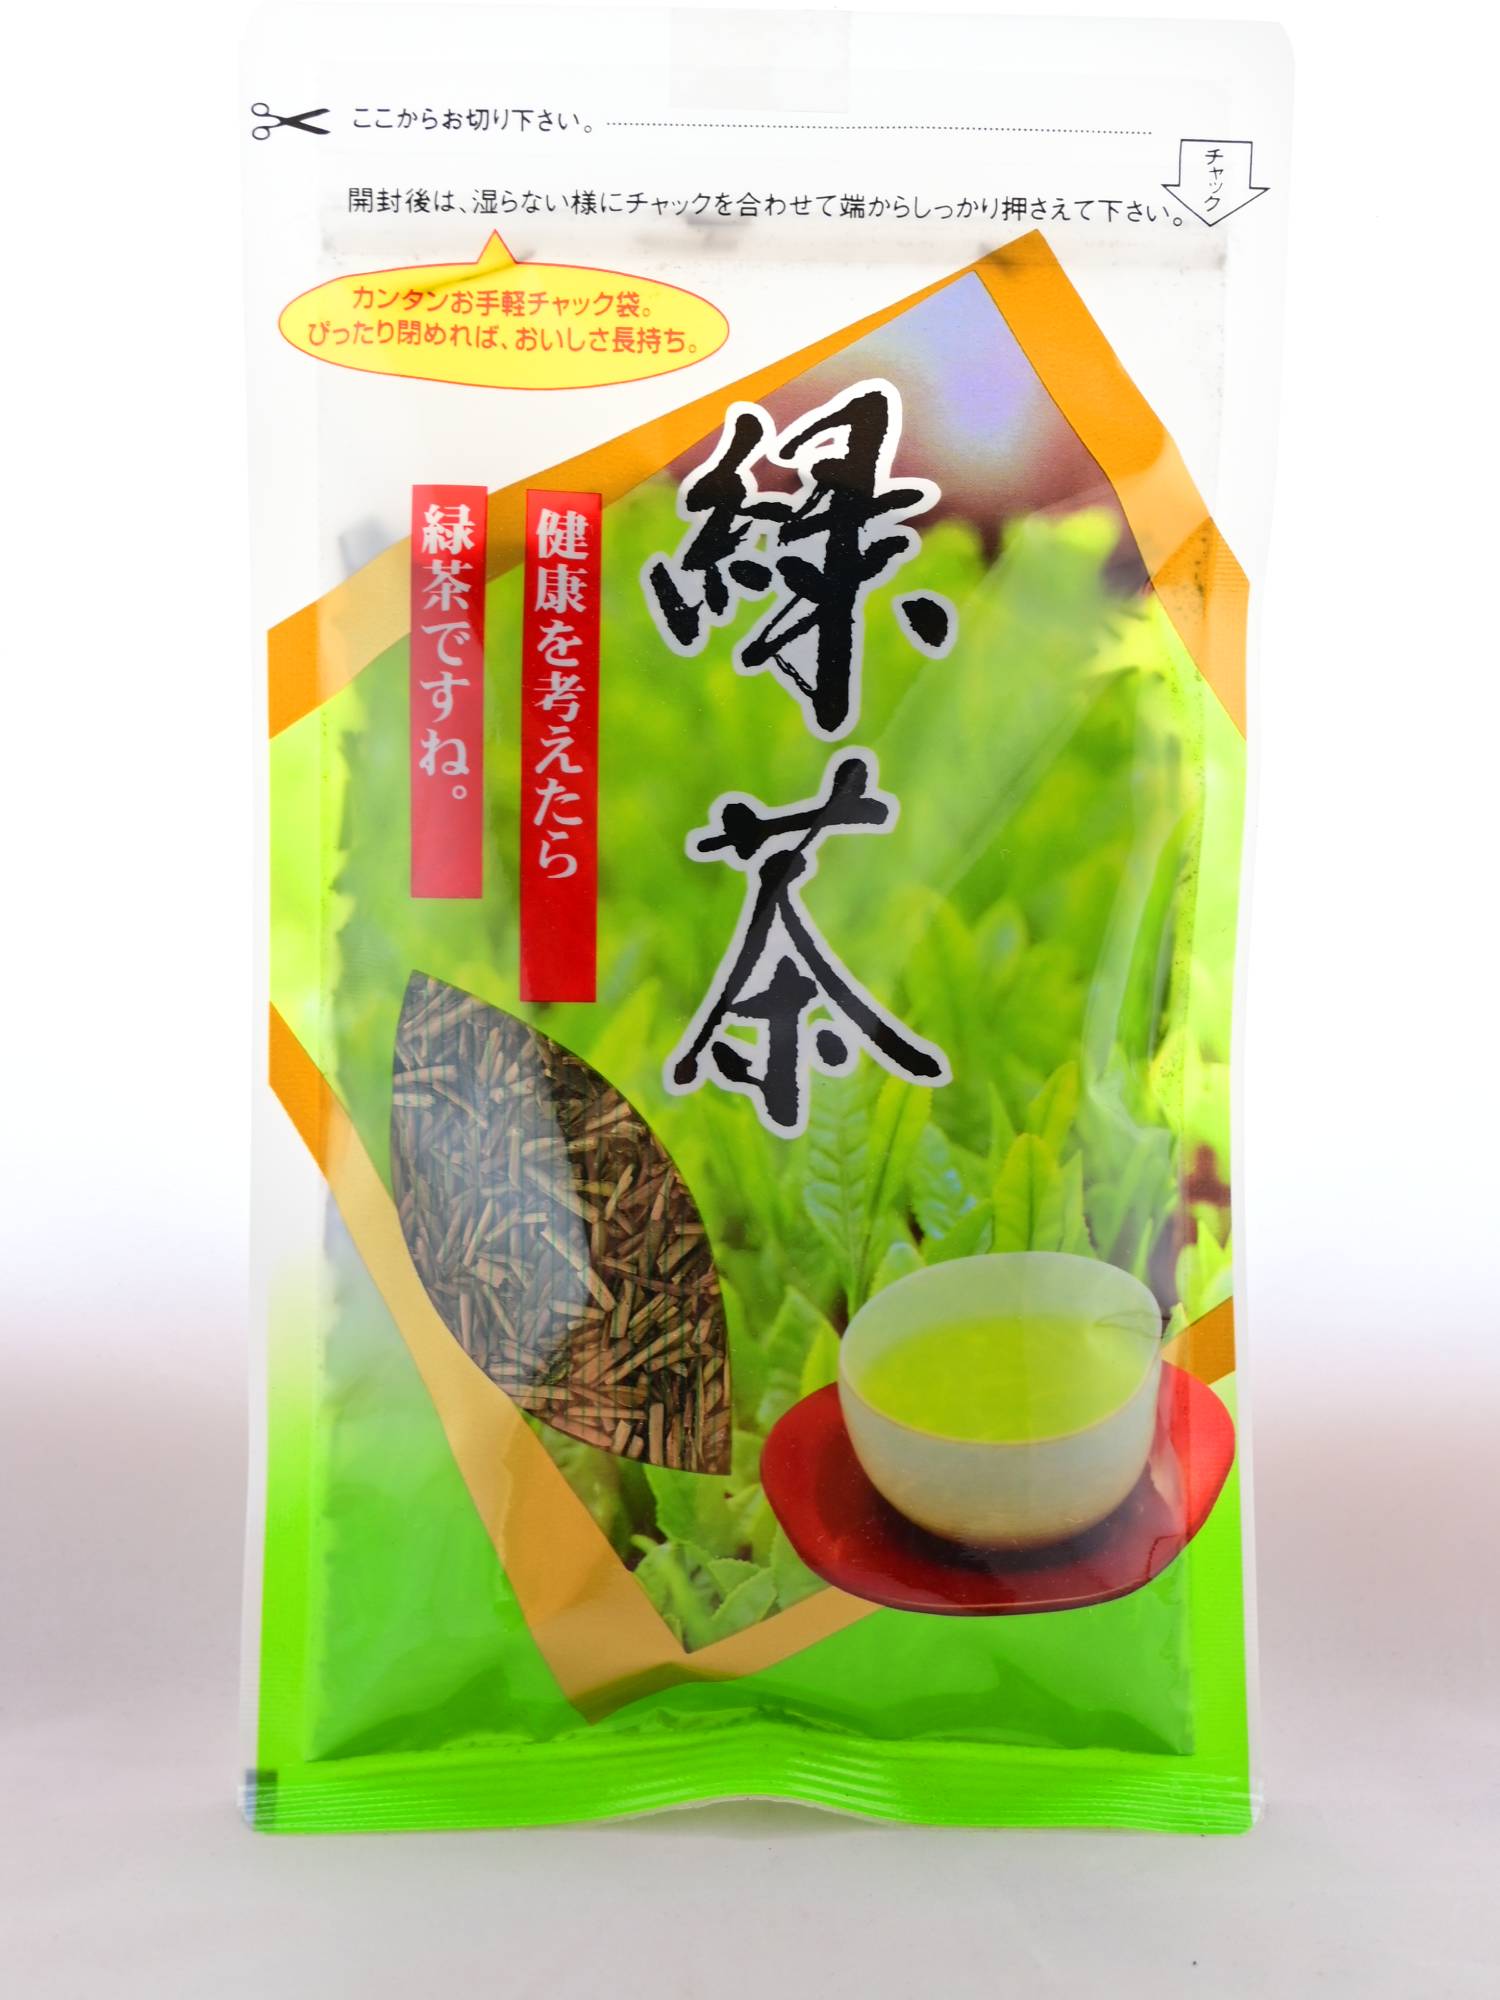 The plastic Hojicha packet prominently features a picture of a growing, green tea bush framed by a diamond in gold. There is a clear spot in the package that shows the stems inside, There are Japanese letters explaining the opening process and resealable nature of the package, as well as the name. 